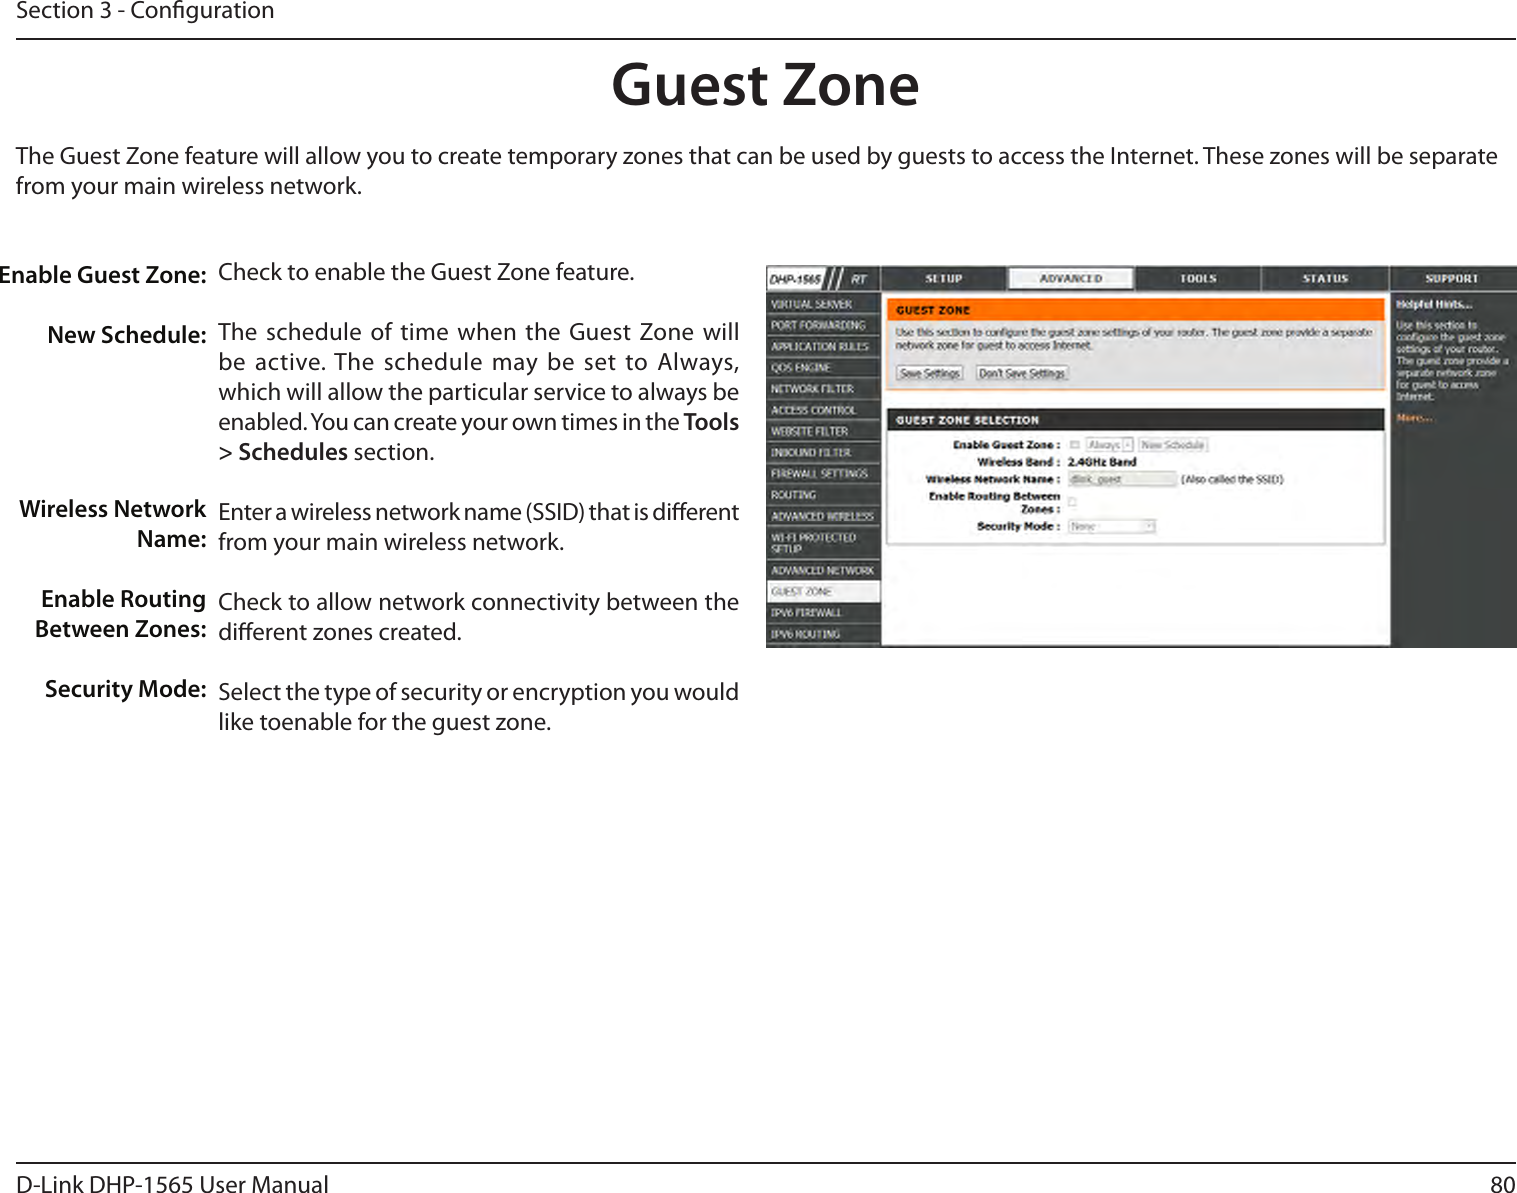 80D-Link DHP-1565 User ManualSection 3 - CongurationGuest ZoneEnable Guest Zone: New Schedule:Wireless NetworkName:Enable RoutingBetween Zones:Security Mode:The Guest Zone feature will allow you to create temporary zones that can be used by guests to access the Internet. These zones will be separatefrom your main wireless network.Check to enable the Guest Zone feature.The schedule of time when the Guest Zone will be active. The schedule may be set to Always, which will allow the particular service to always be enabled. You can create your own times in the Tools &gt; Schedules section.Enter a wireless network name (SSID) that is dierent from your main wireless network.Check to allow network connectivity between the dierent zones created.Select the type of security or encryption you would like toenable for the guest zone.